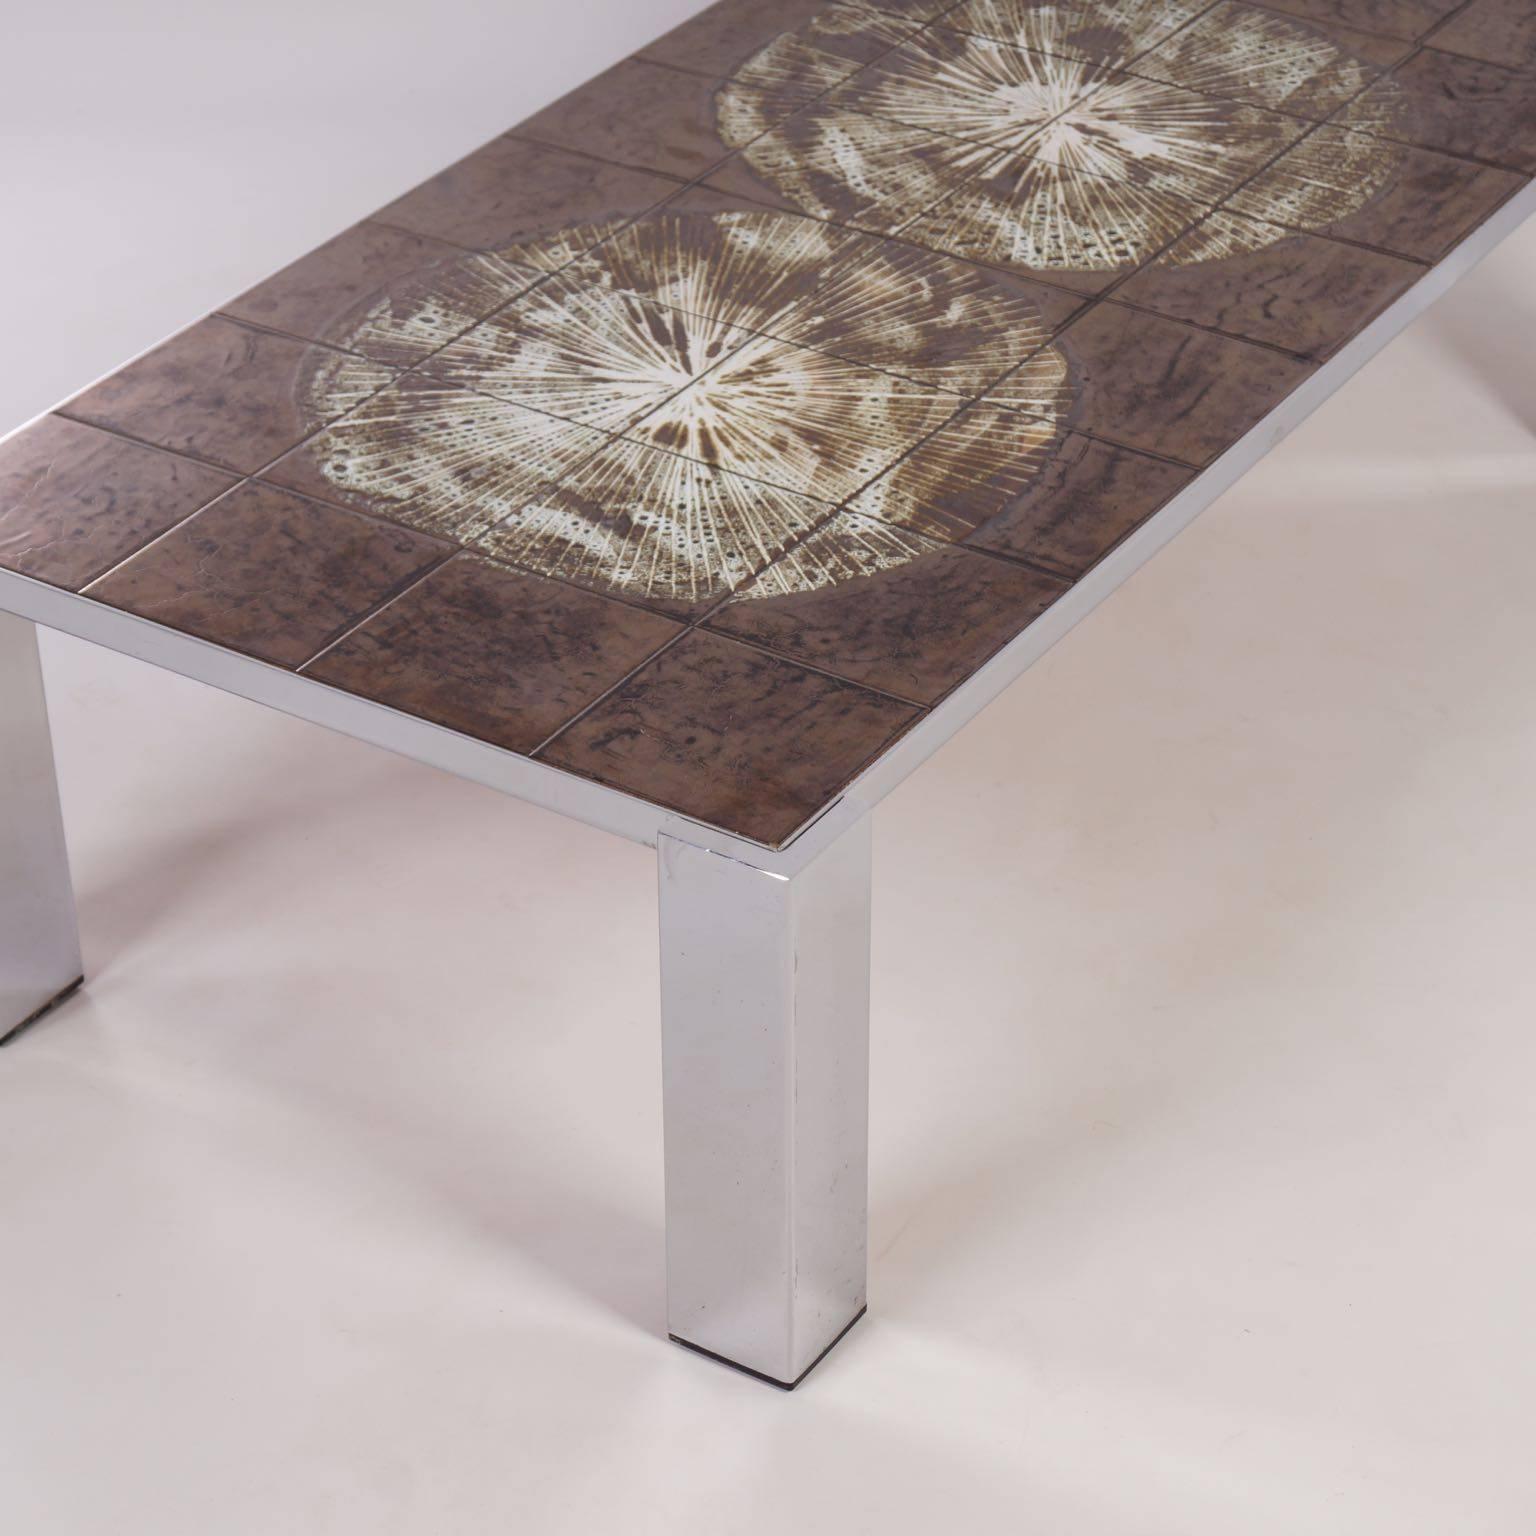 Mid-20th Century Hand-Painted Tile Coffee Table by Belarti, 1960s For Sale